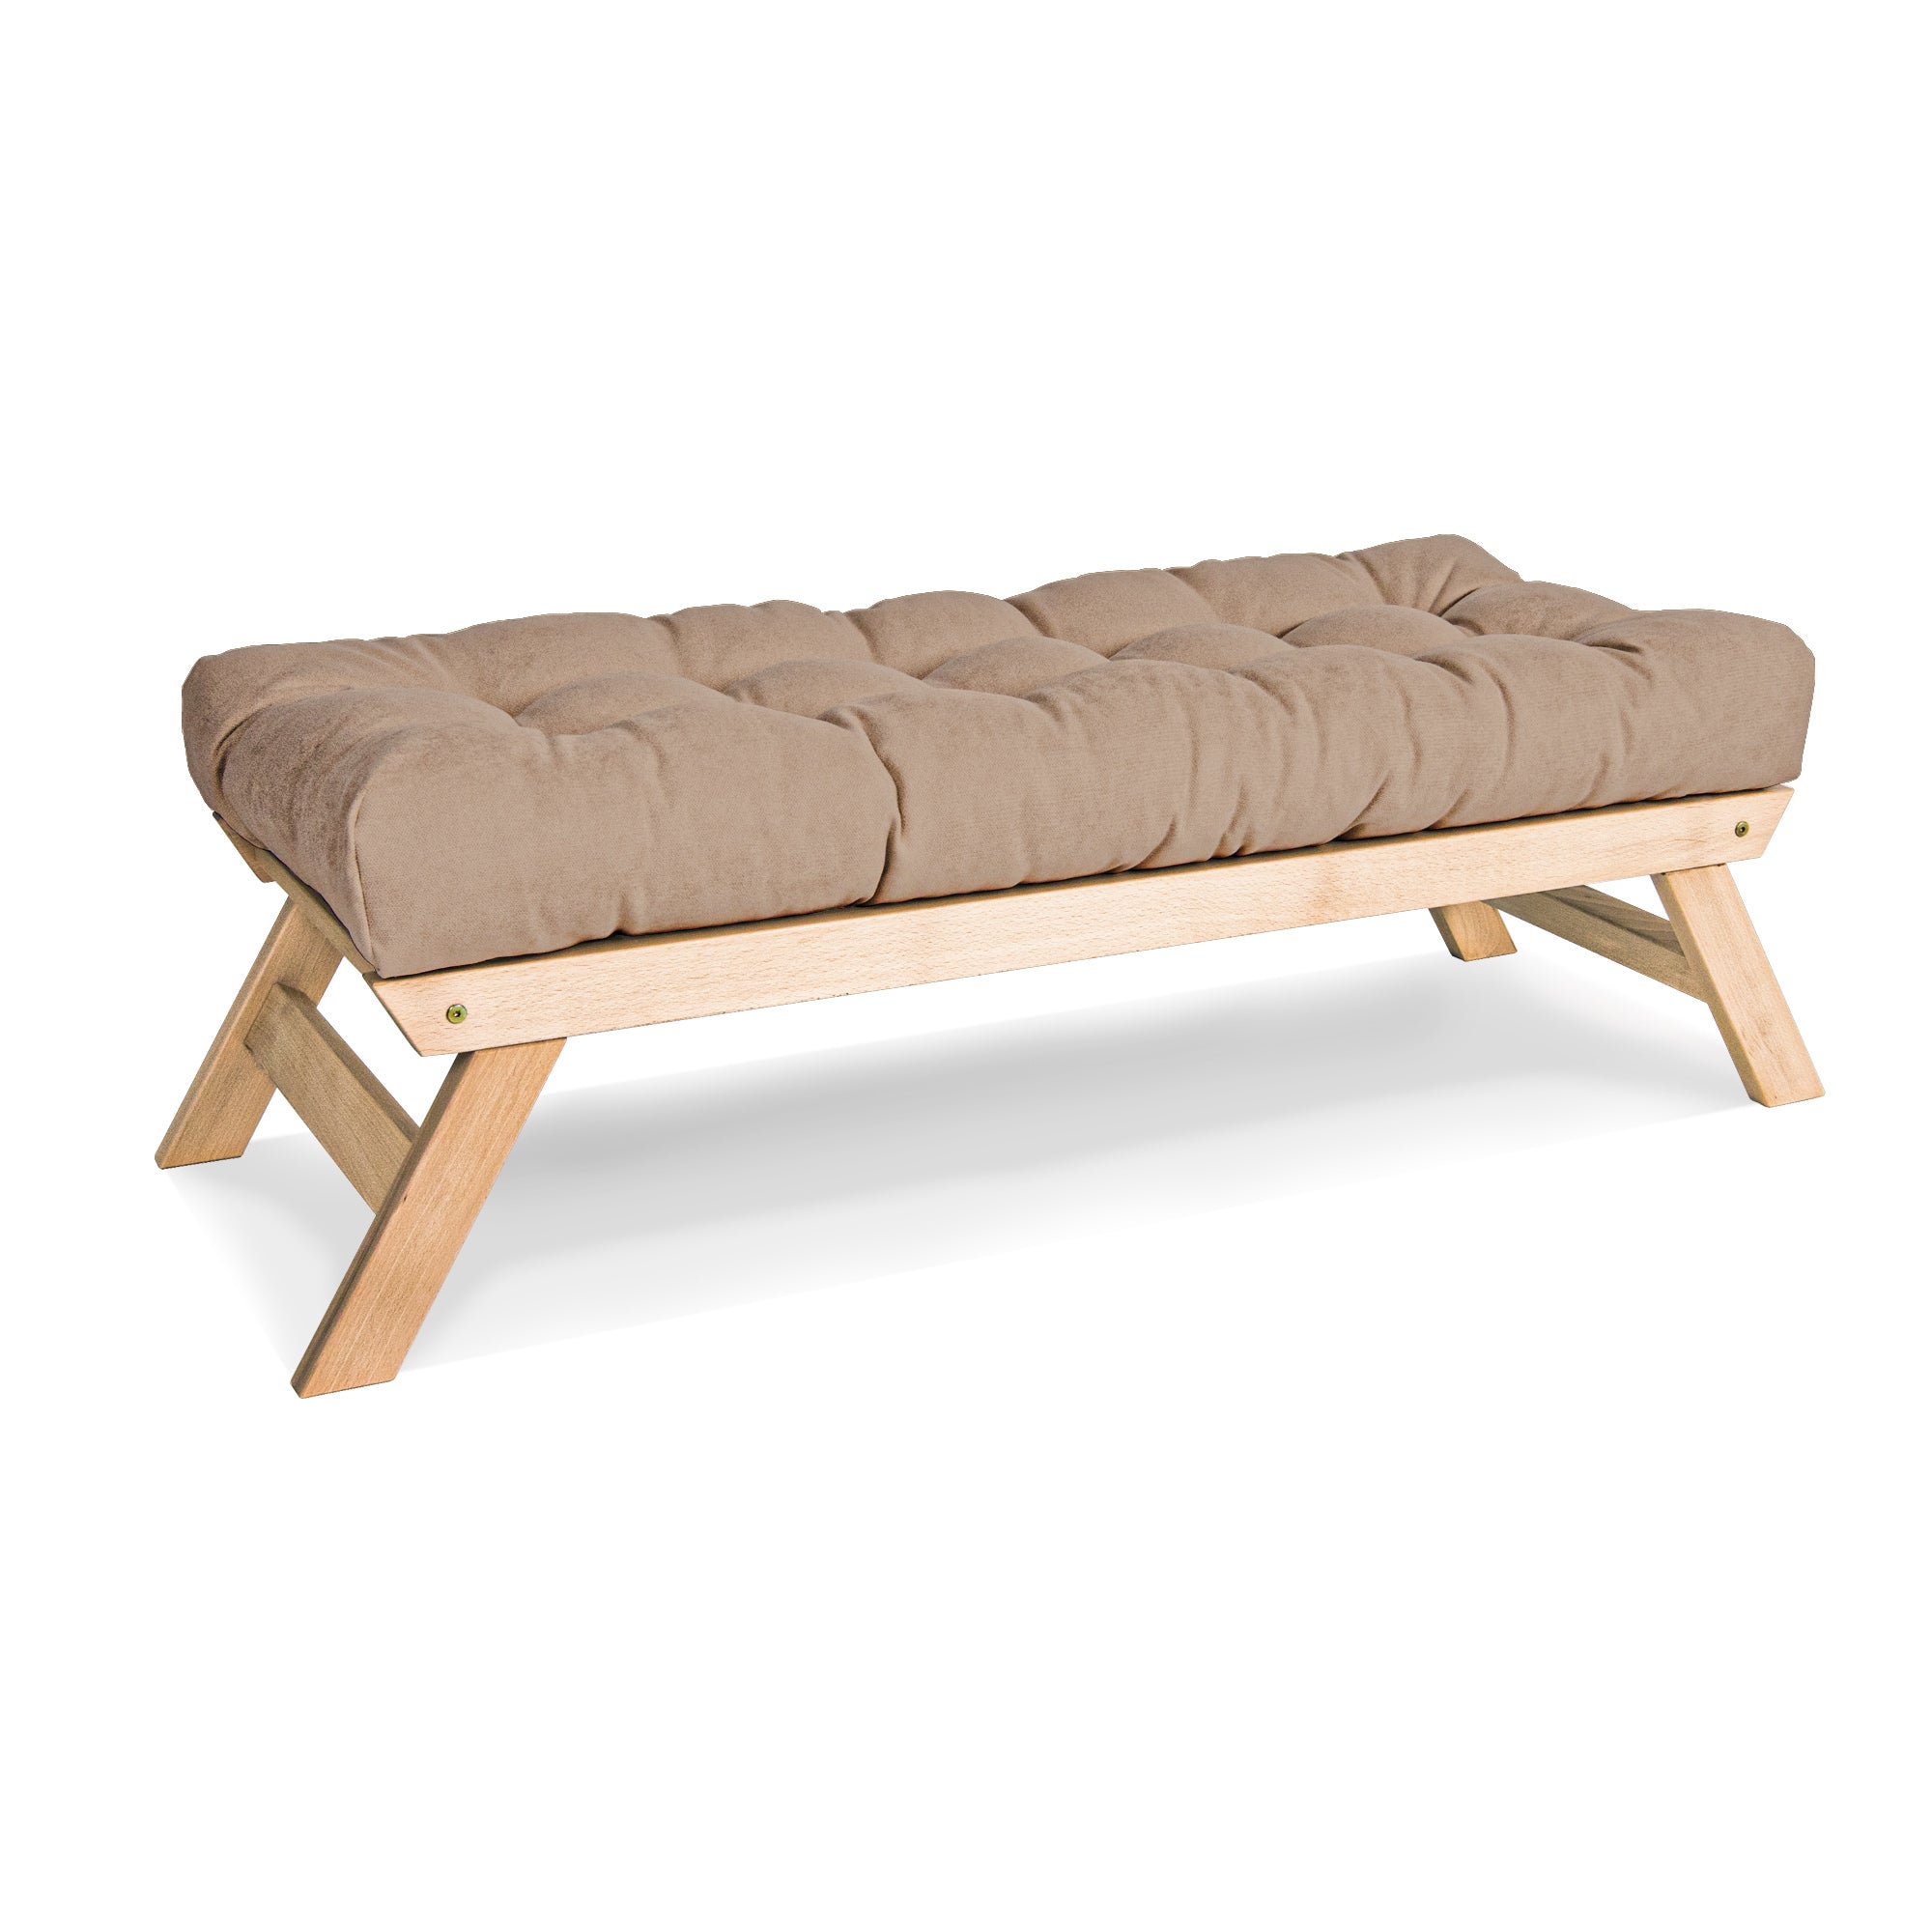 ALLEGRO Wooden Bench Seat with Cushions